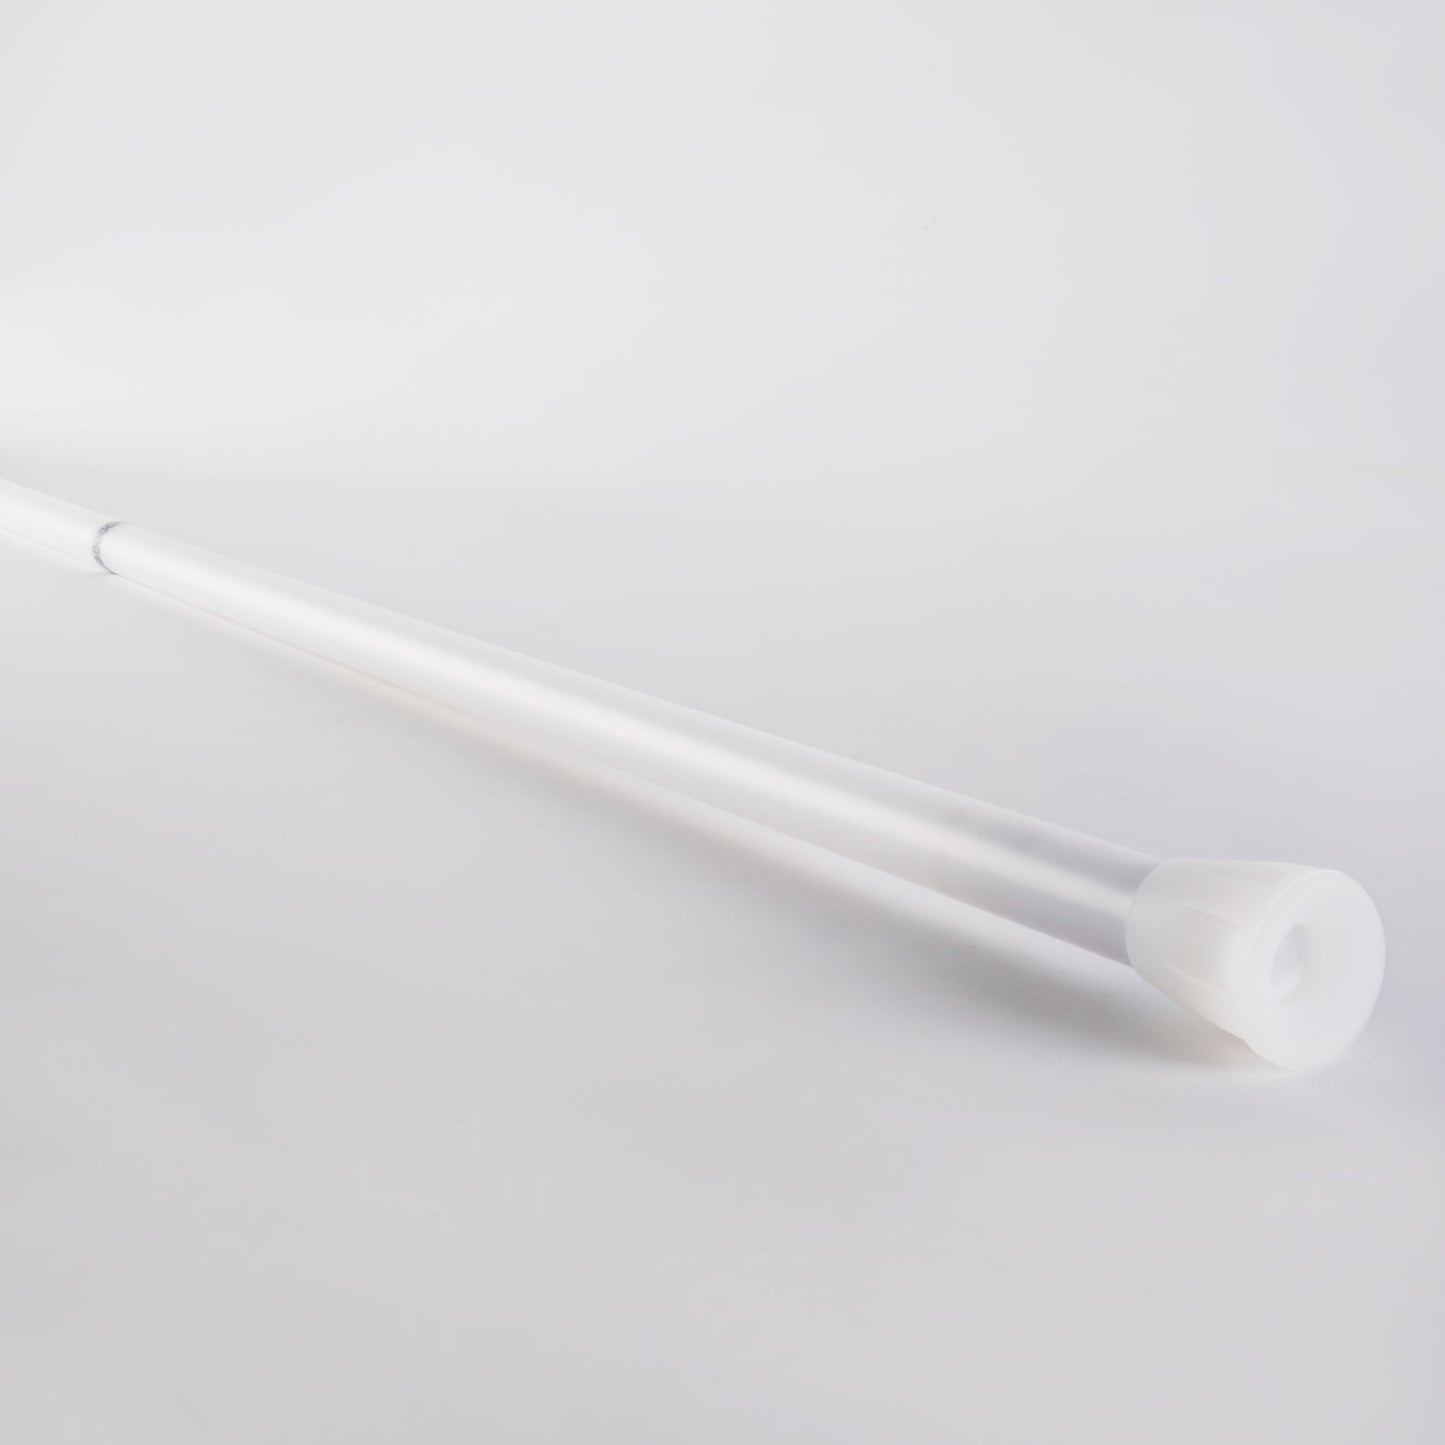 Concentrate Contact Series LED Light Staff